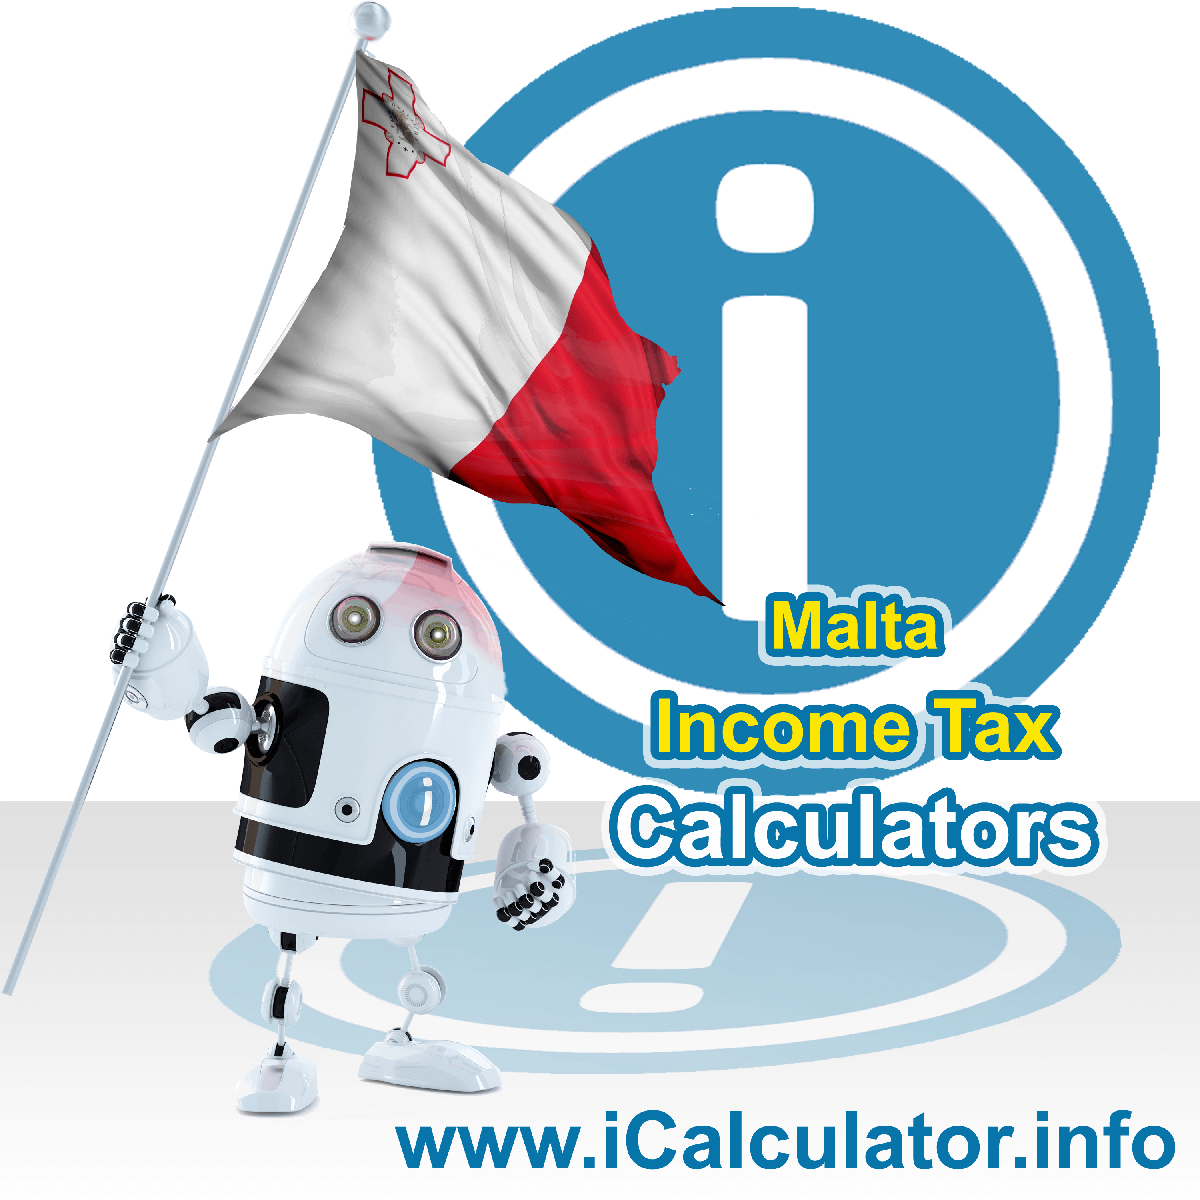 Malta Income Tax Calculator. This image shows a new employer in Malta calculating the annual payroll costs based on multiple payroll payments in one year in Malta using the Malta income tax calculator to understand their payroll costs in Malta in 2022